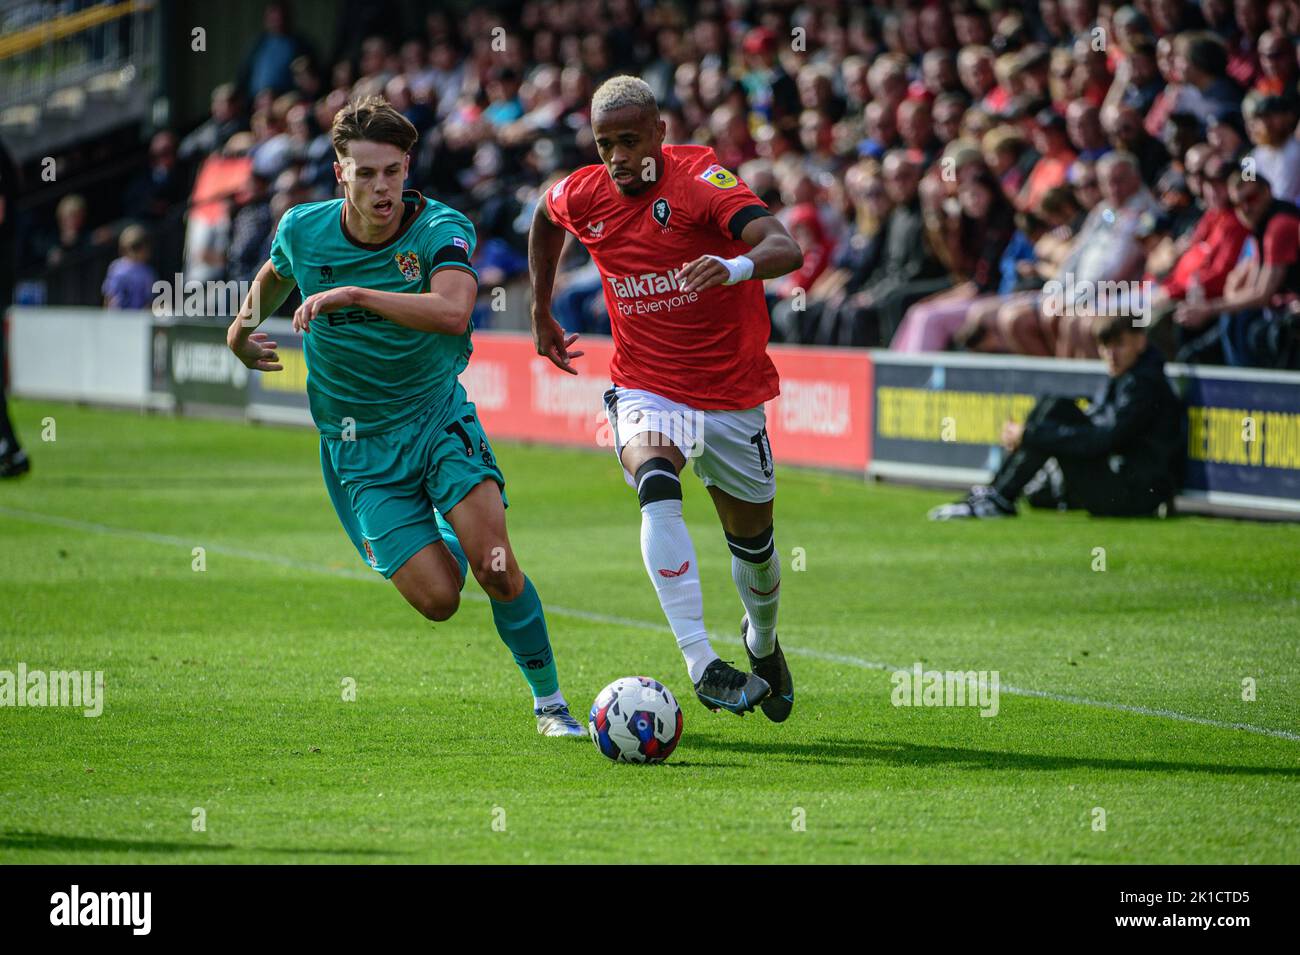 Rhys Hughes of Tranmere Rovers tackles Elliot Simões of Salford City during the Sky Bet League 2 match between Salford City and Tranmere Rovers at Moor Lane, Salford on Saturday 17th September 2022. Stock Photo